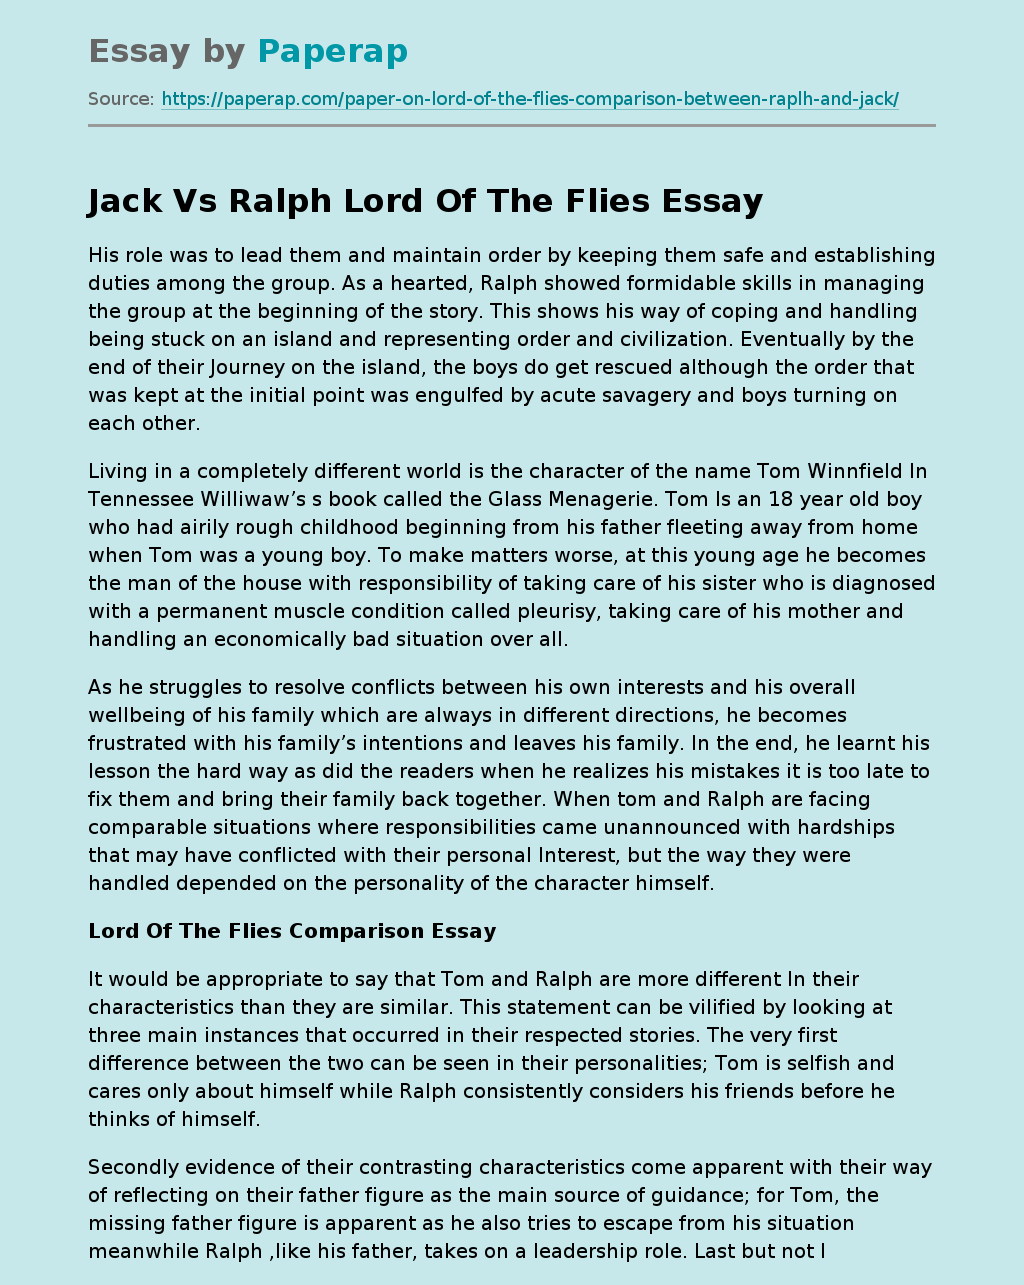 Jack Vs Ralph Lord Of The Flies